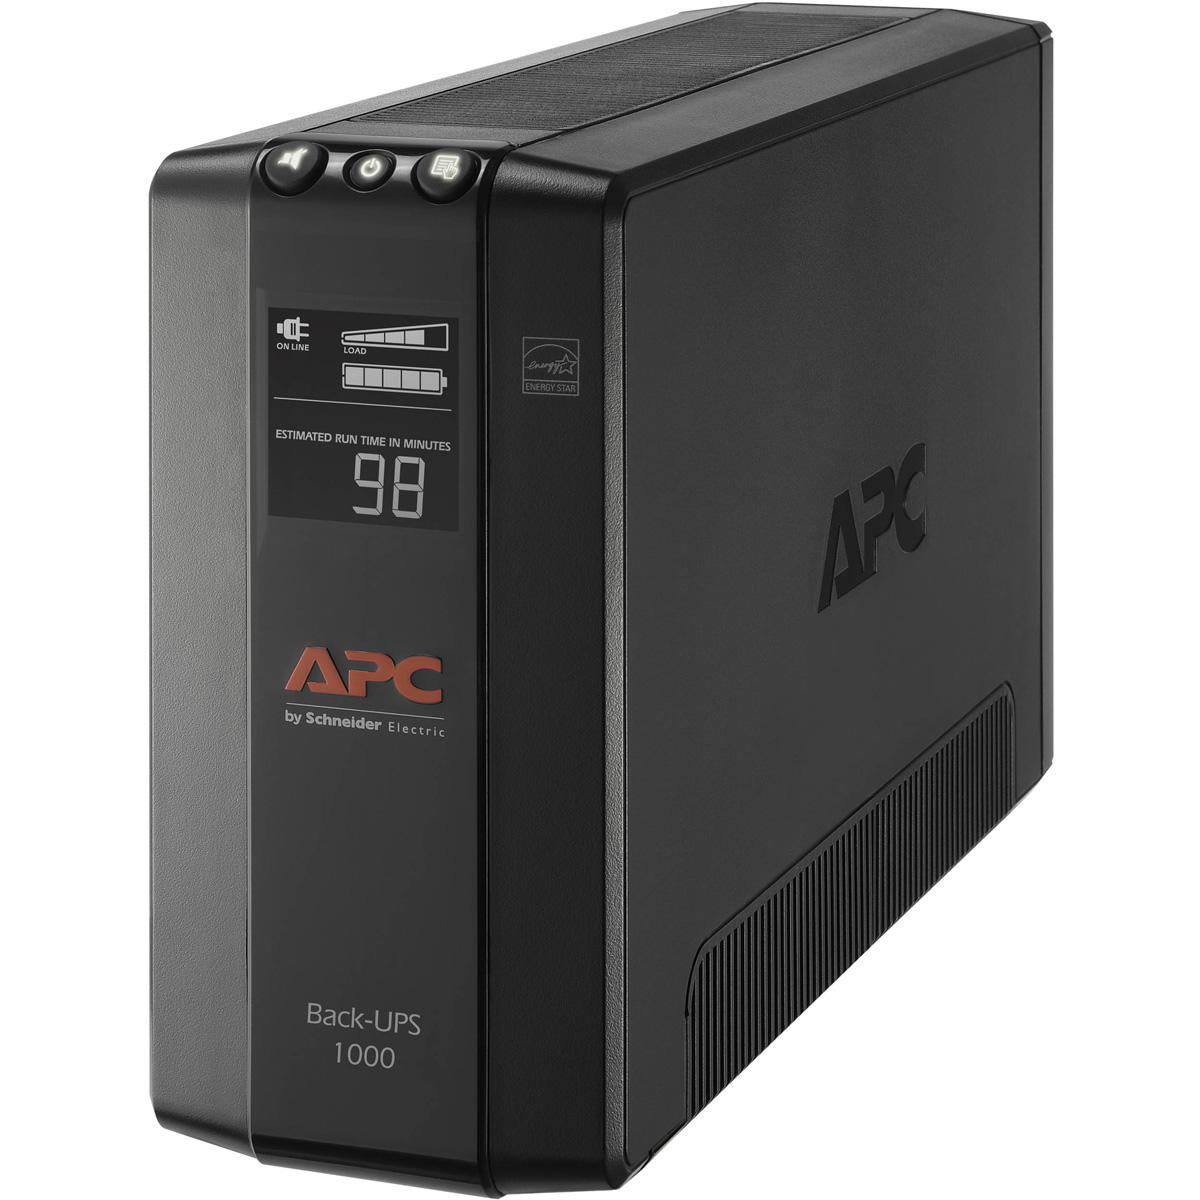 8-Outlet APC Back-UPS Pro 1000 VA Uninterruptible Power Supply for $99.99 Shipped